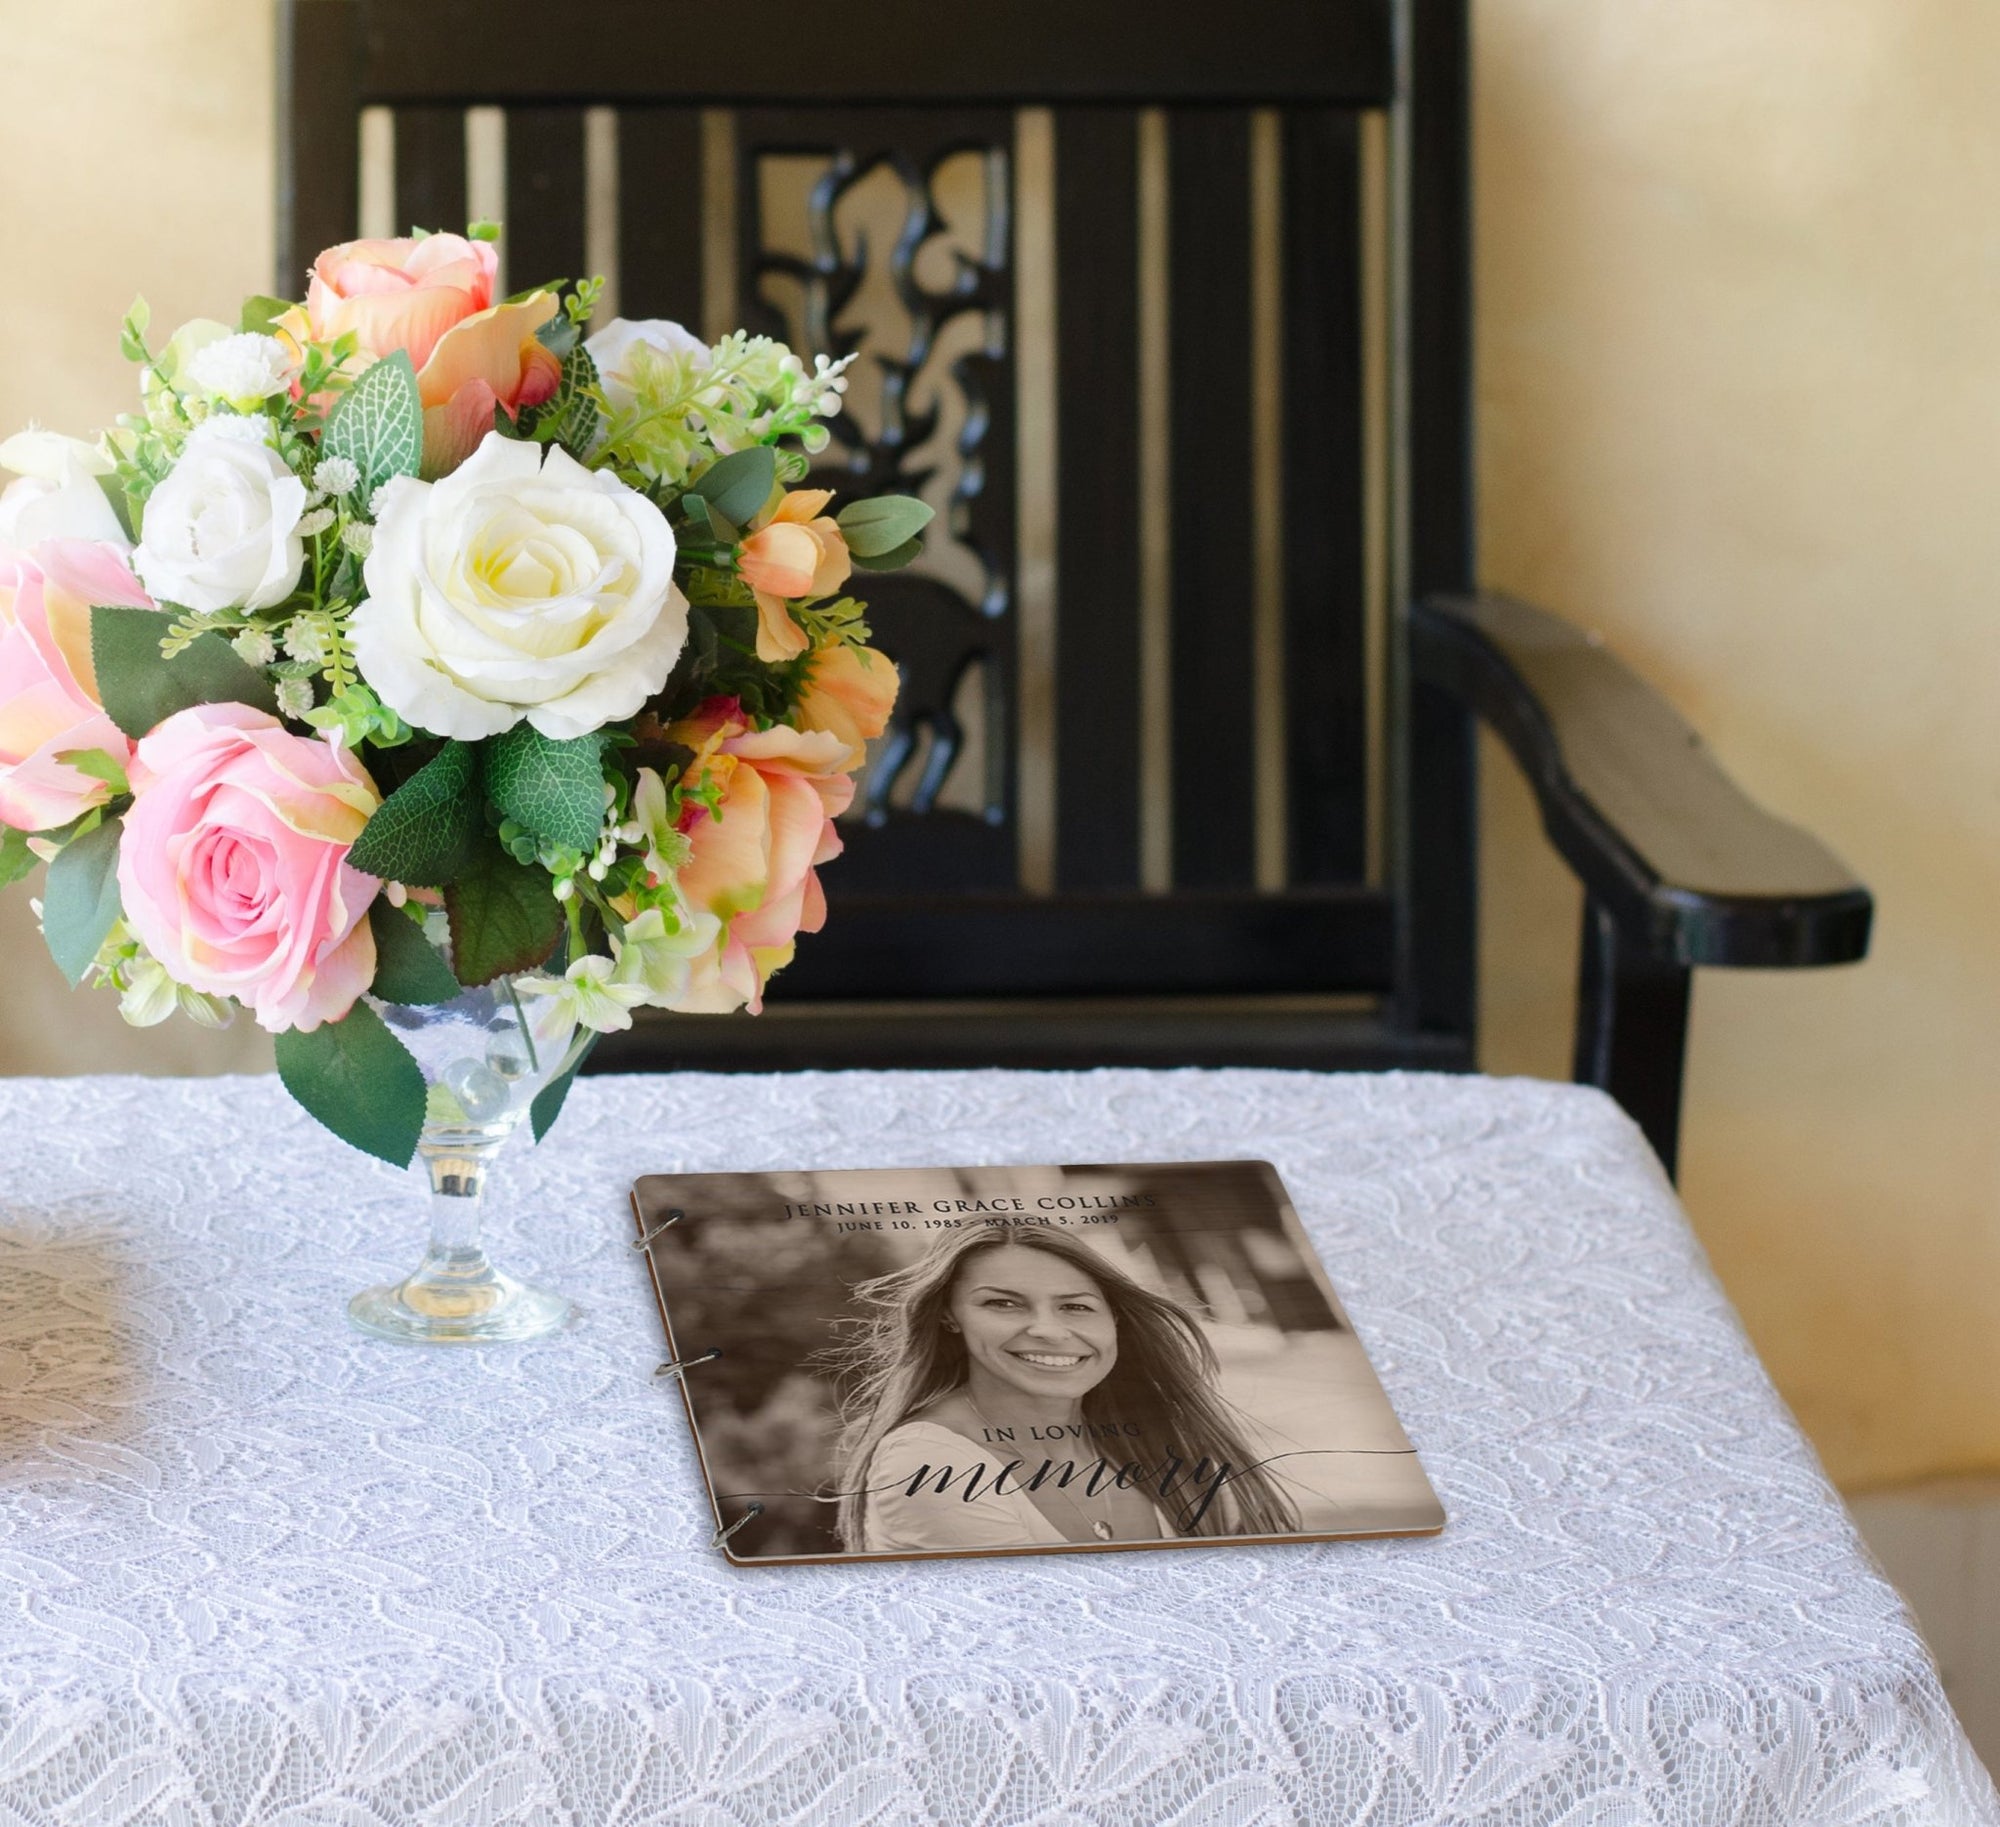 Personalized Funeral Service Guest Book 8.5x11 In Loving Memory Black and White Portrait - LifeSong Milestones